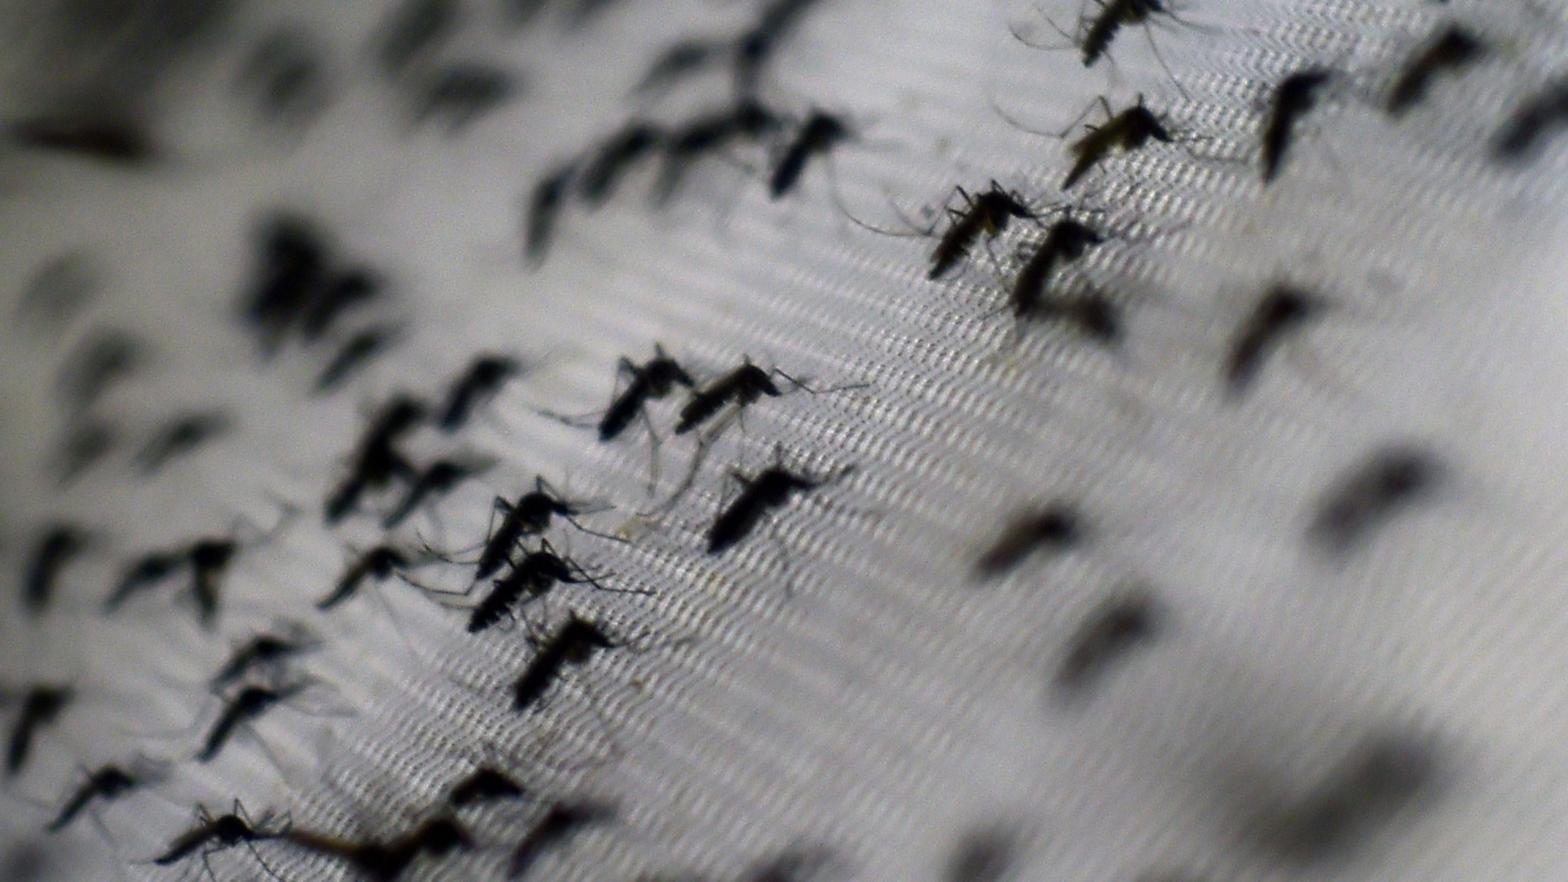 A photo of Aedes aegypti mosquitoes infected with the Wolbachia bacterium, taken at the Oswaldo Cruz foundation in Rio de Janeiro, Brazil, on October 2, 2014.  (Photo: Christophe Simon/AFP, Getty Images)